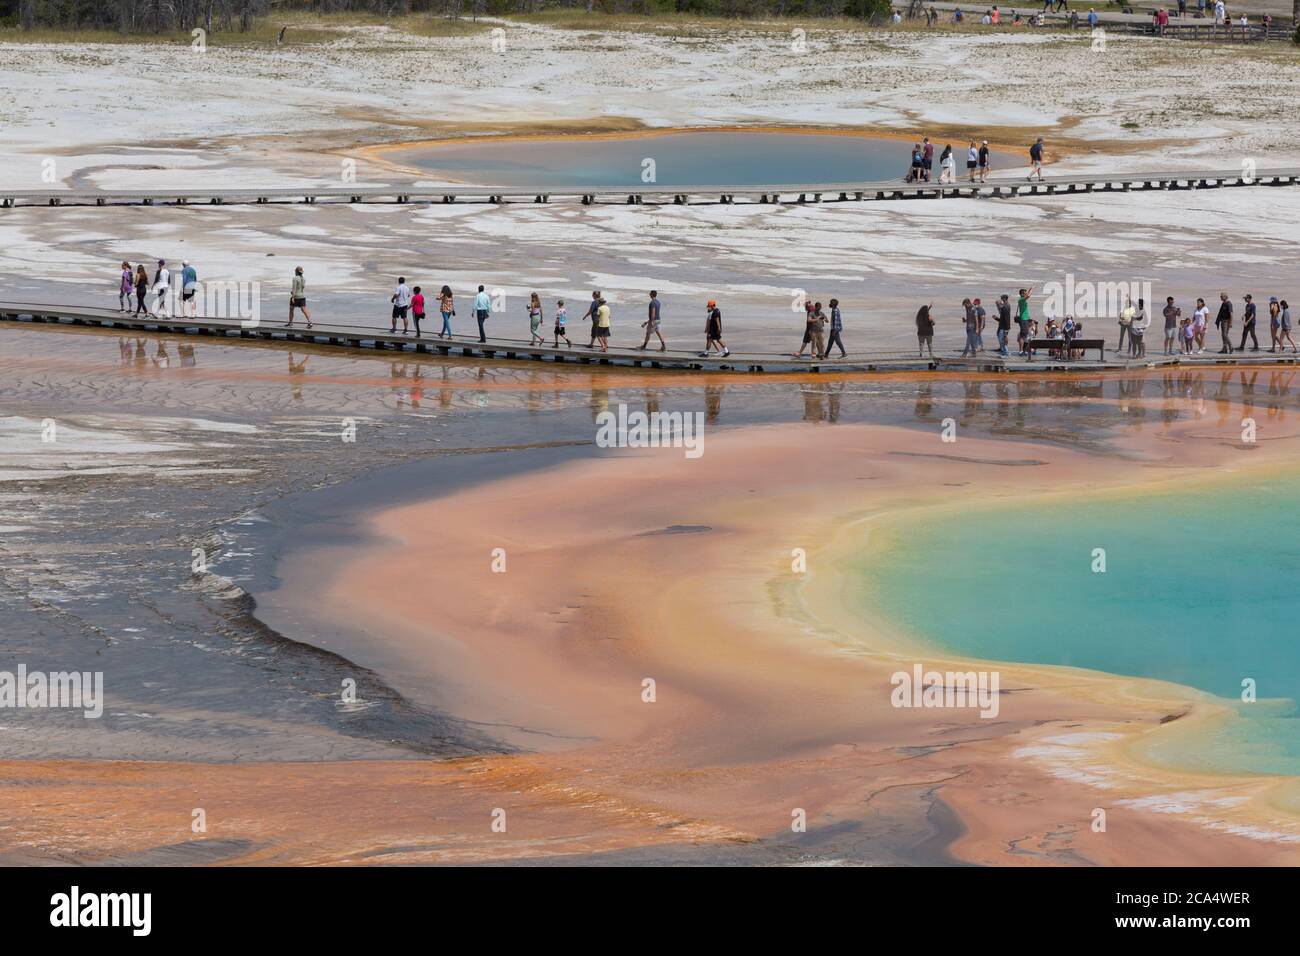 Visitors walk along the boardwalk at Grand Prismatic Spring on Monday, August 3, 2020. Many of the parks boardwalks have been made one-way in order to combat the transmission of the COVID-19 virus. The park recently reported several positive cases of the COVID-19 virus among visitors and concessioners. Stock Photo